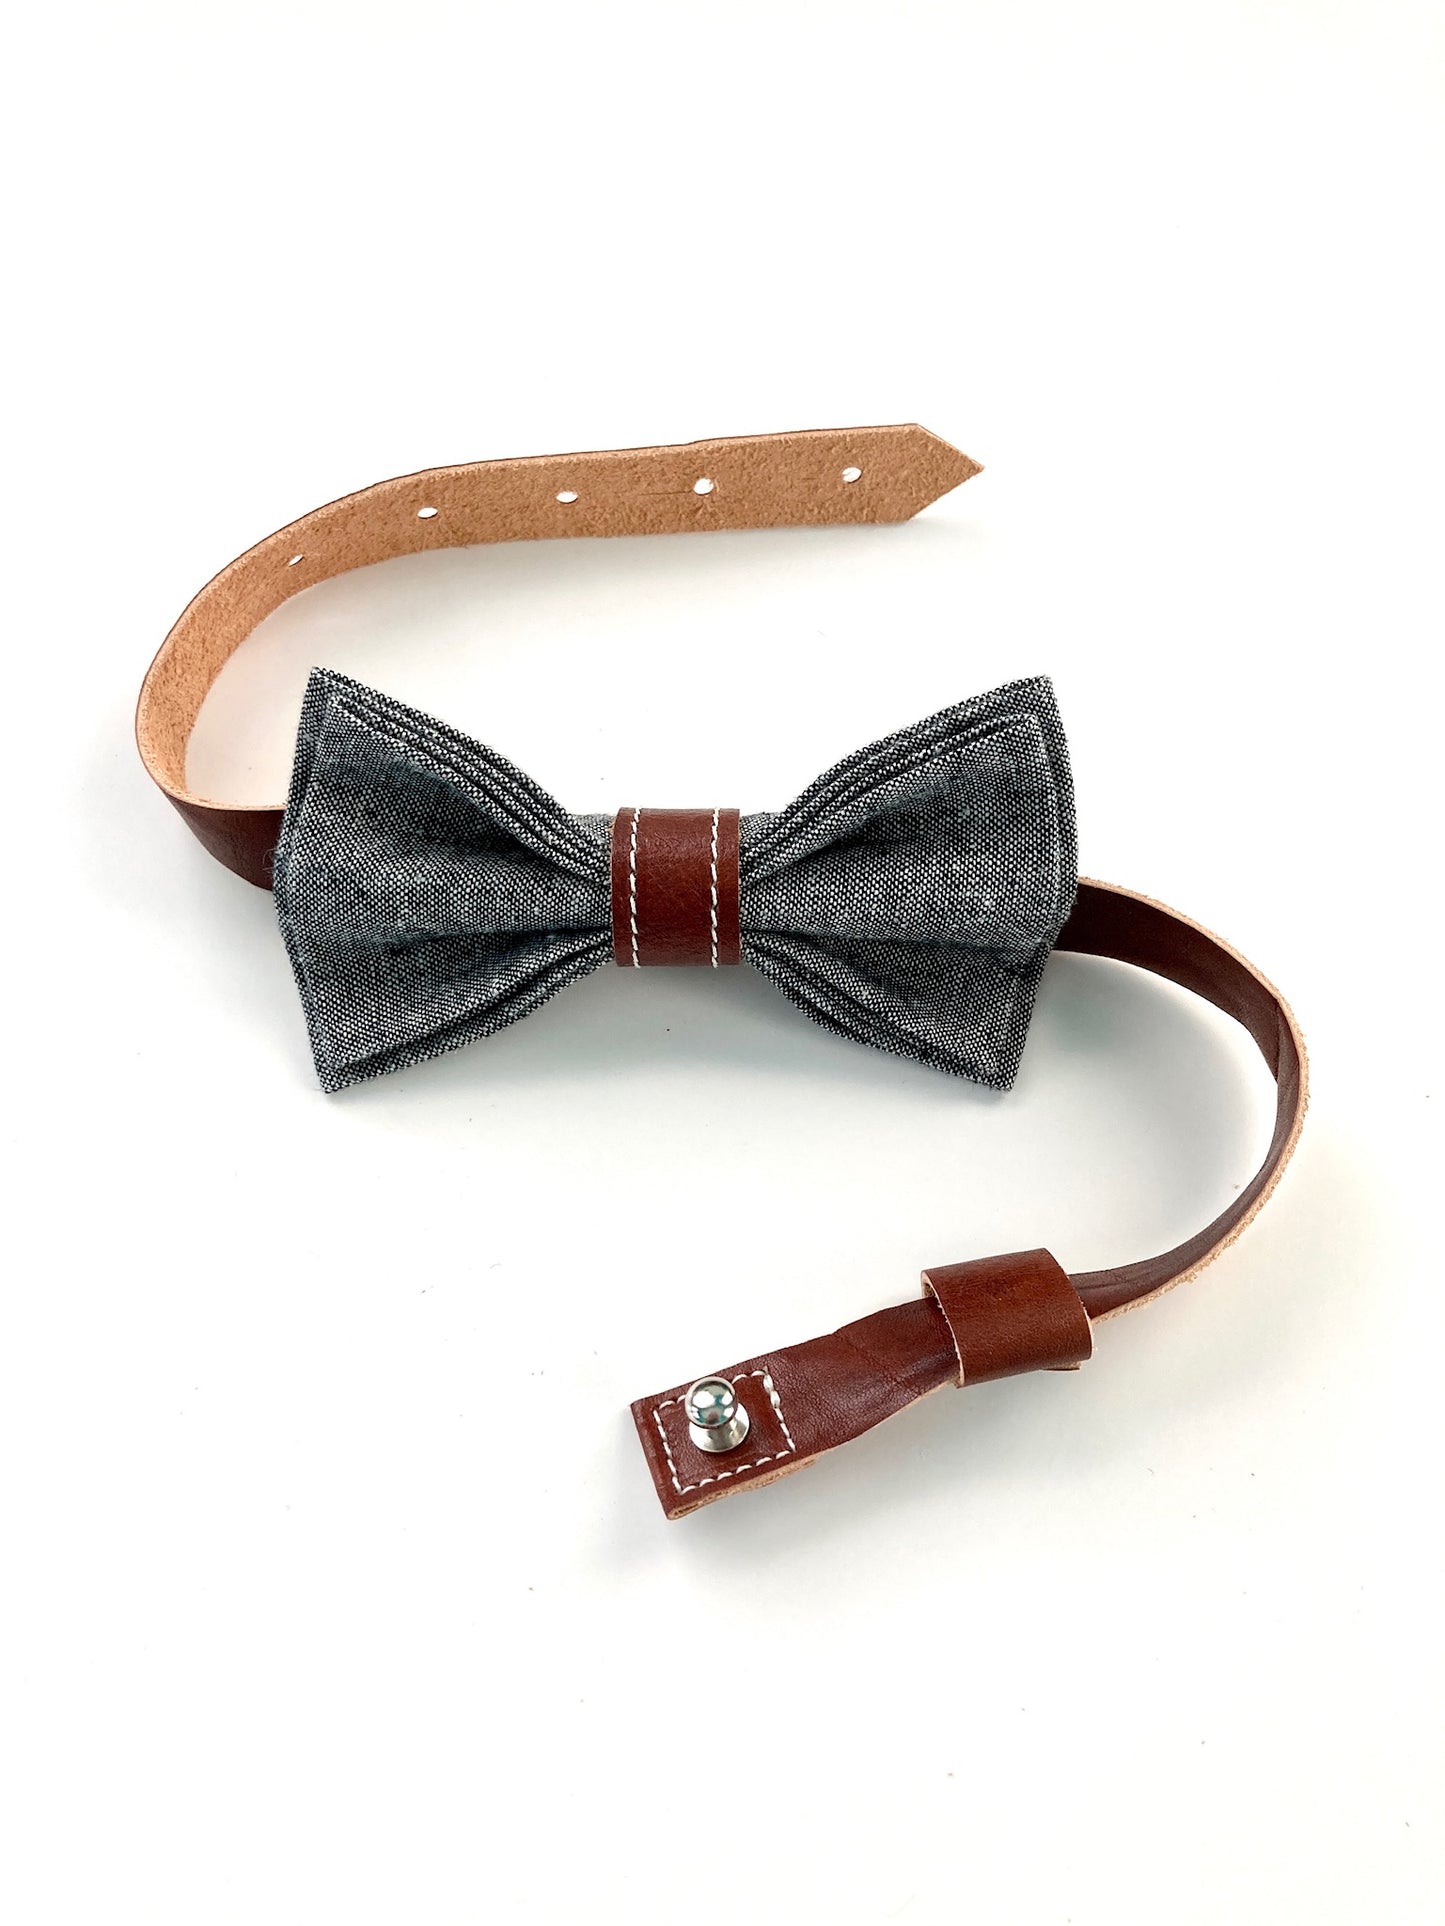 Stratton Suspender Co. Texas Oil Black Linen Bowtie paired with Italian Pontedero Cognac Leather Knot along with Black Leather Strap